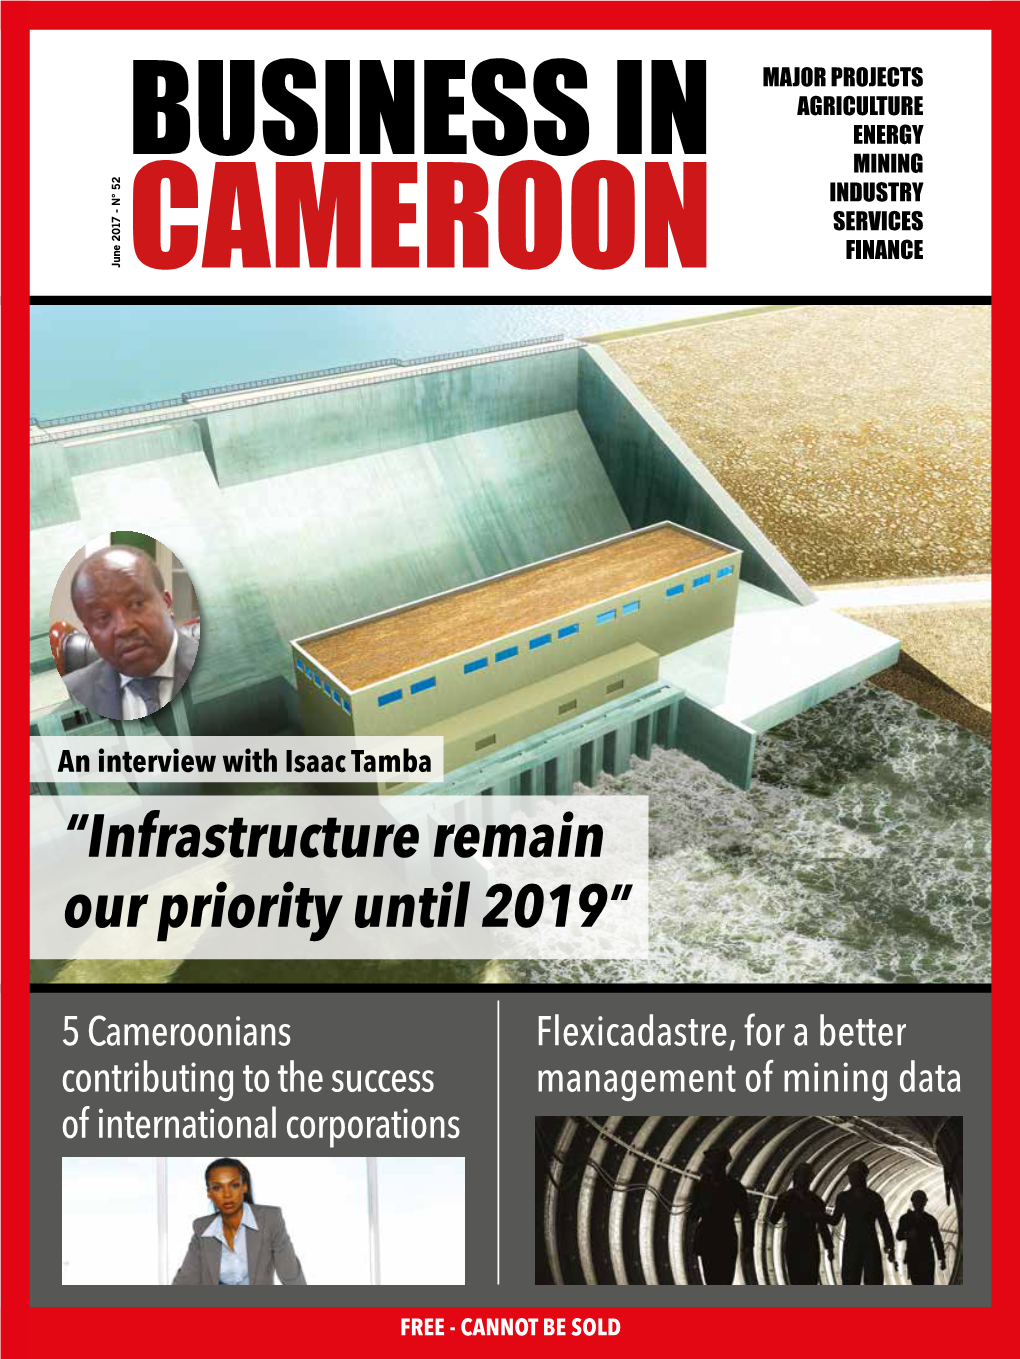 “Infrastructure Remain Our Priority Until 2019”